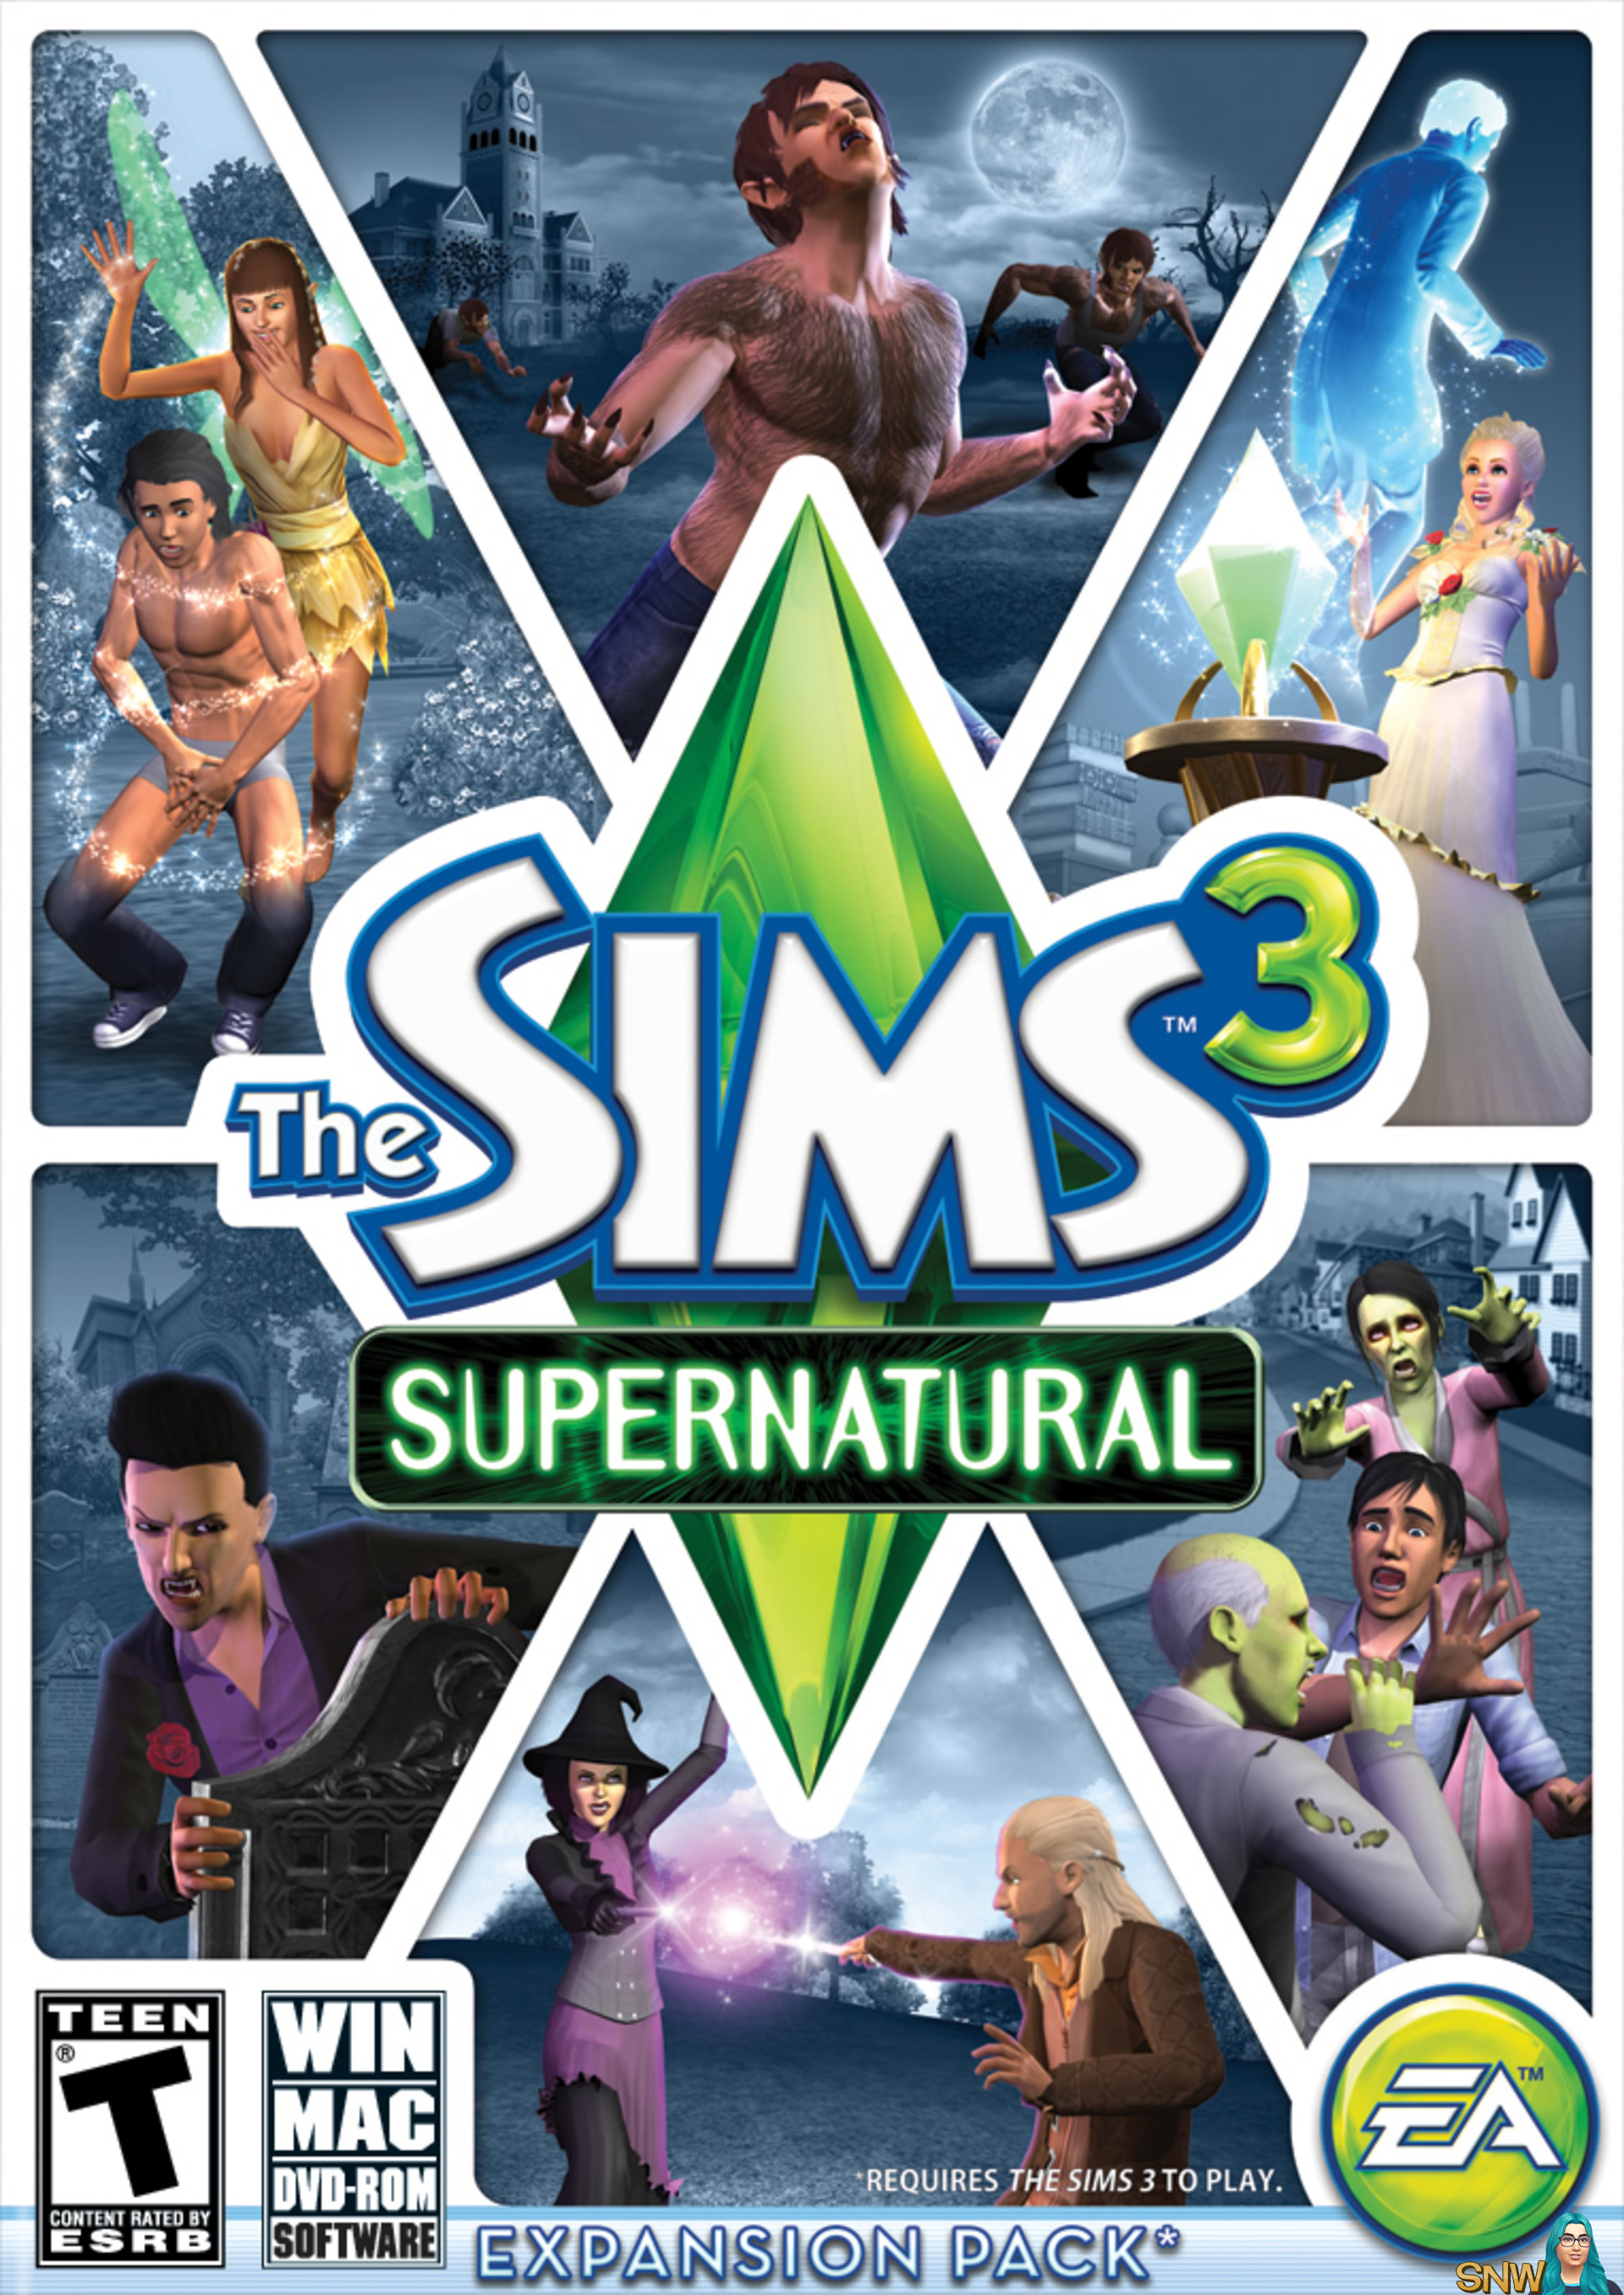 How To Download The Sims 3 Cc Mac